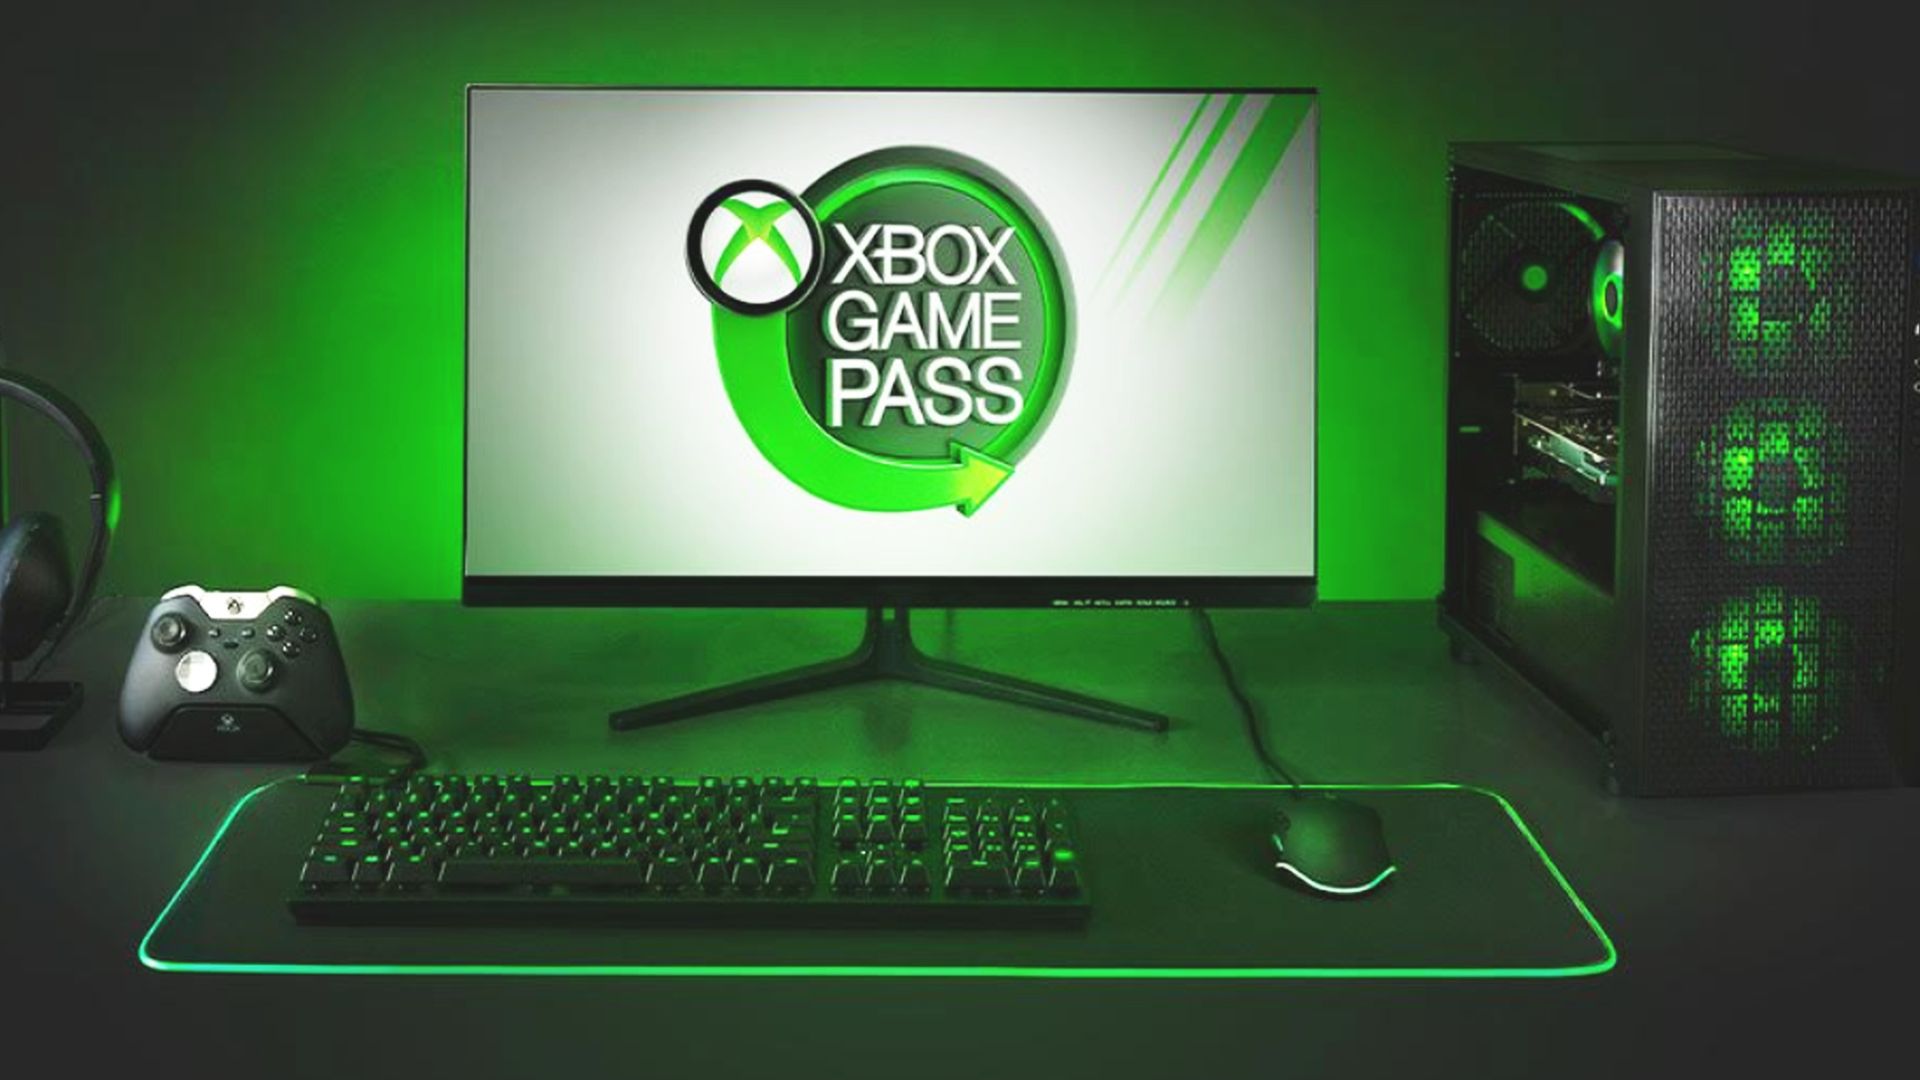 Xbox PC Game Pass expands to 40 new countries